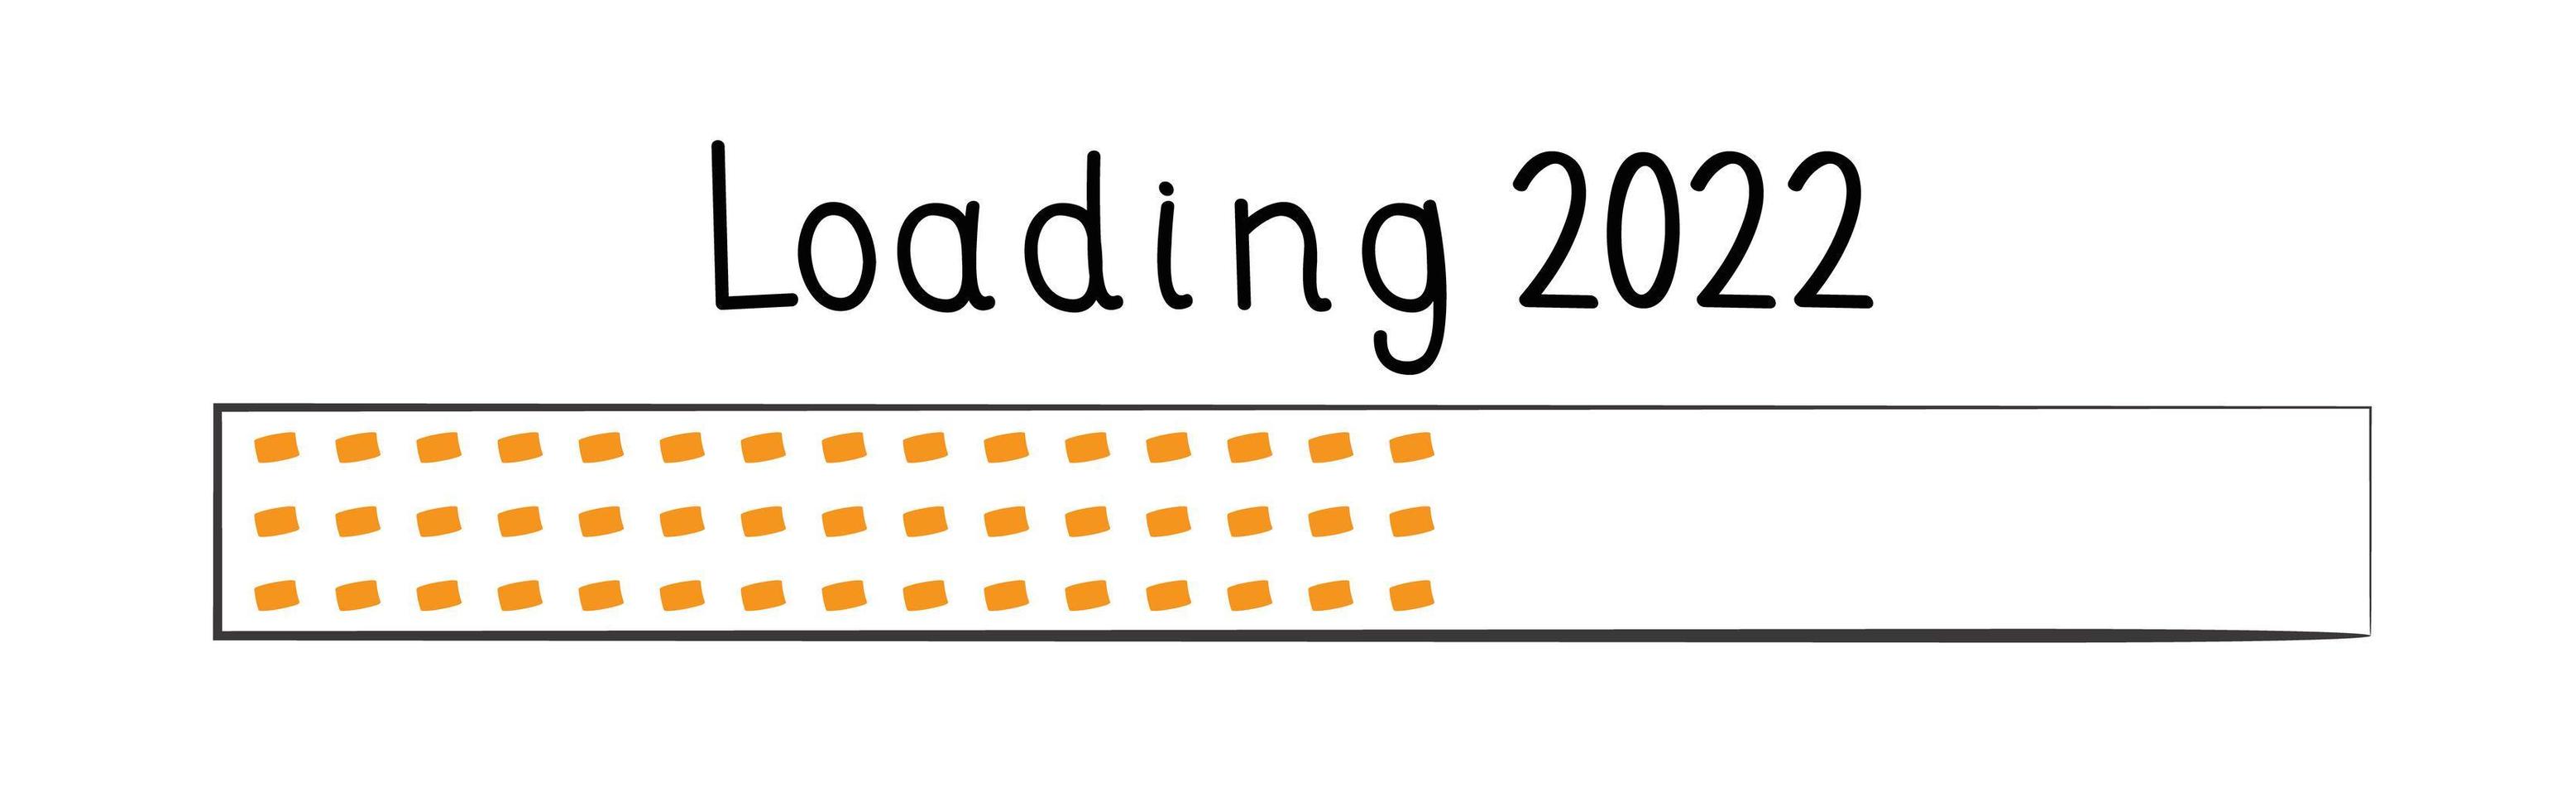 2022 New year loading bar sign drawn in doodle style. Winter holidays coming soon, year end load bar button vector for graphic design